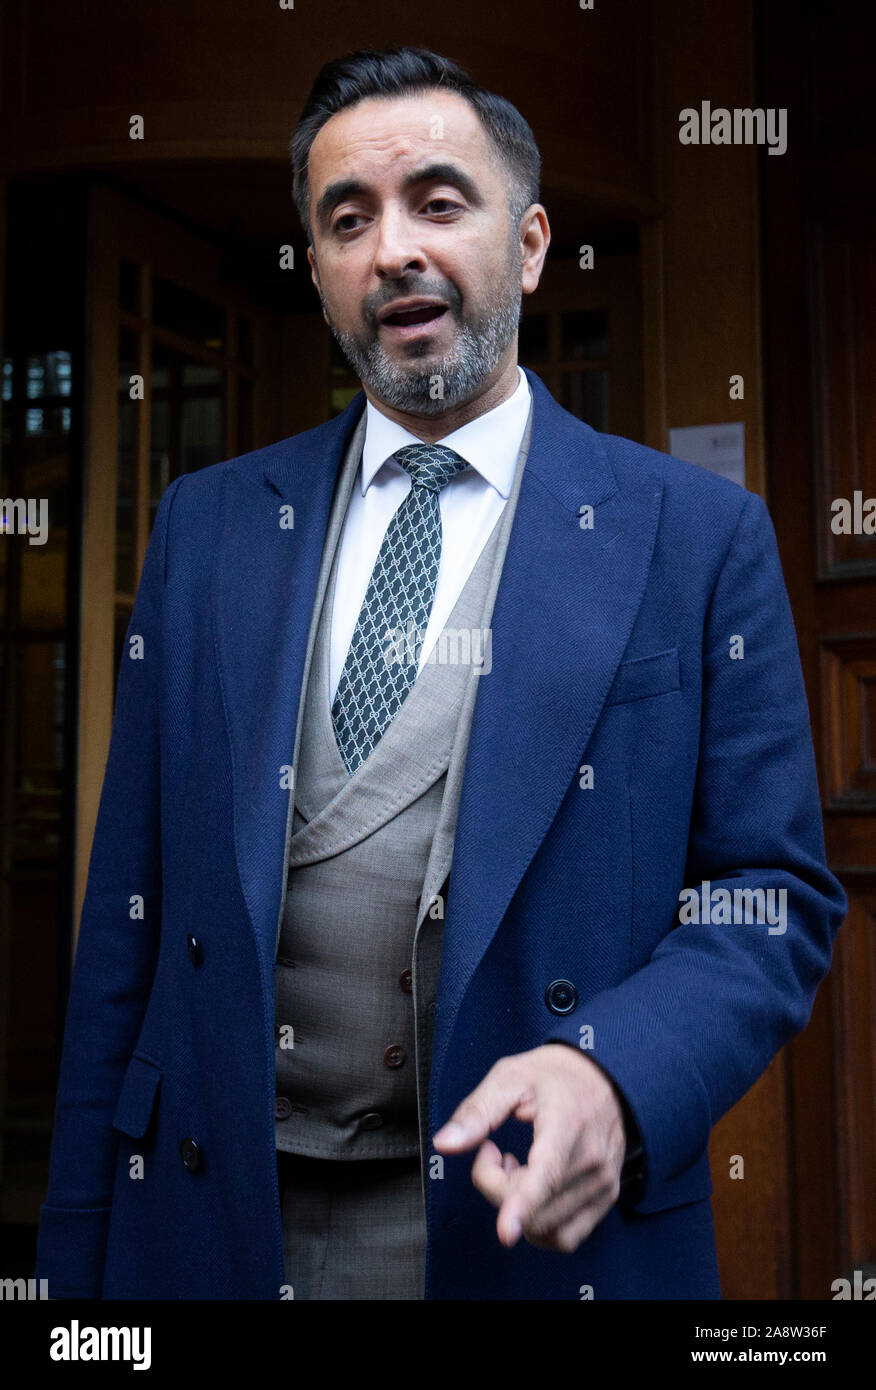 Solicitor Aamer Anwar, who is representing the family of the late Sheku Bayoh who died in police custody in 2015, arrives at the Crown Office in Edinburgh. During a meeting, the family of Mr Bayoh, along with Mr Anwar, will speak with the Lord Advocate, Solicitor General for Scotland Alison Di Rollo QC, Crown Counsel Alex Prentice QC, and Deputy Crown Agent Lindsey Miller. Stock Photo